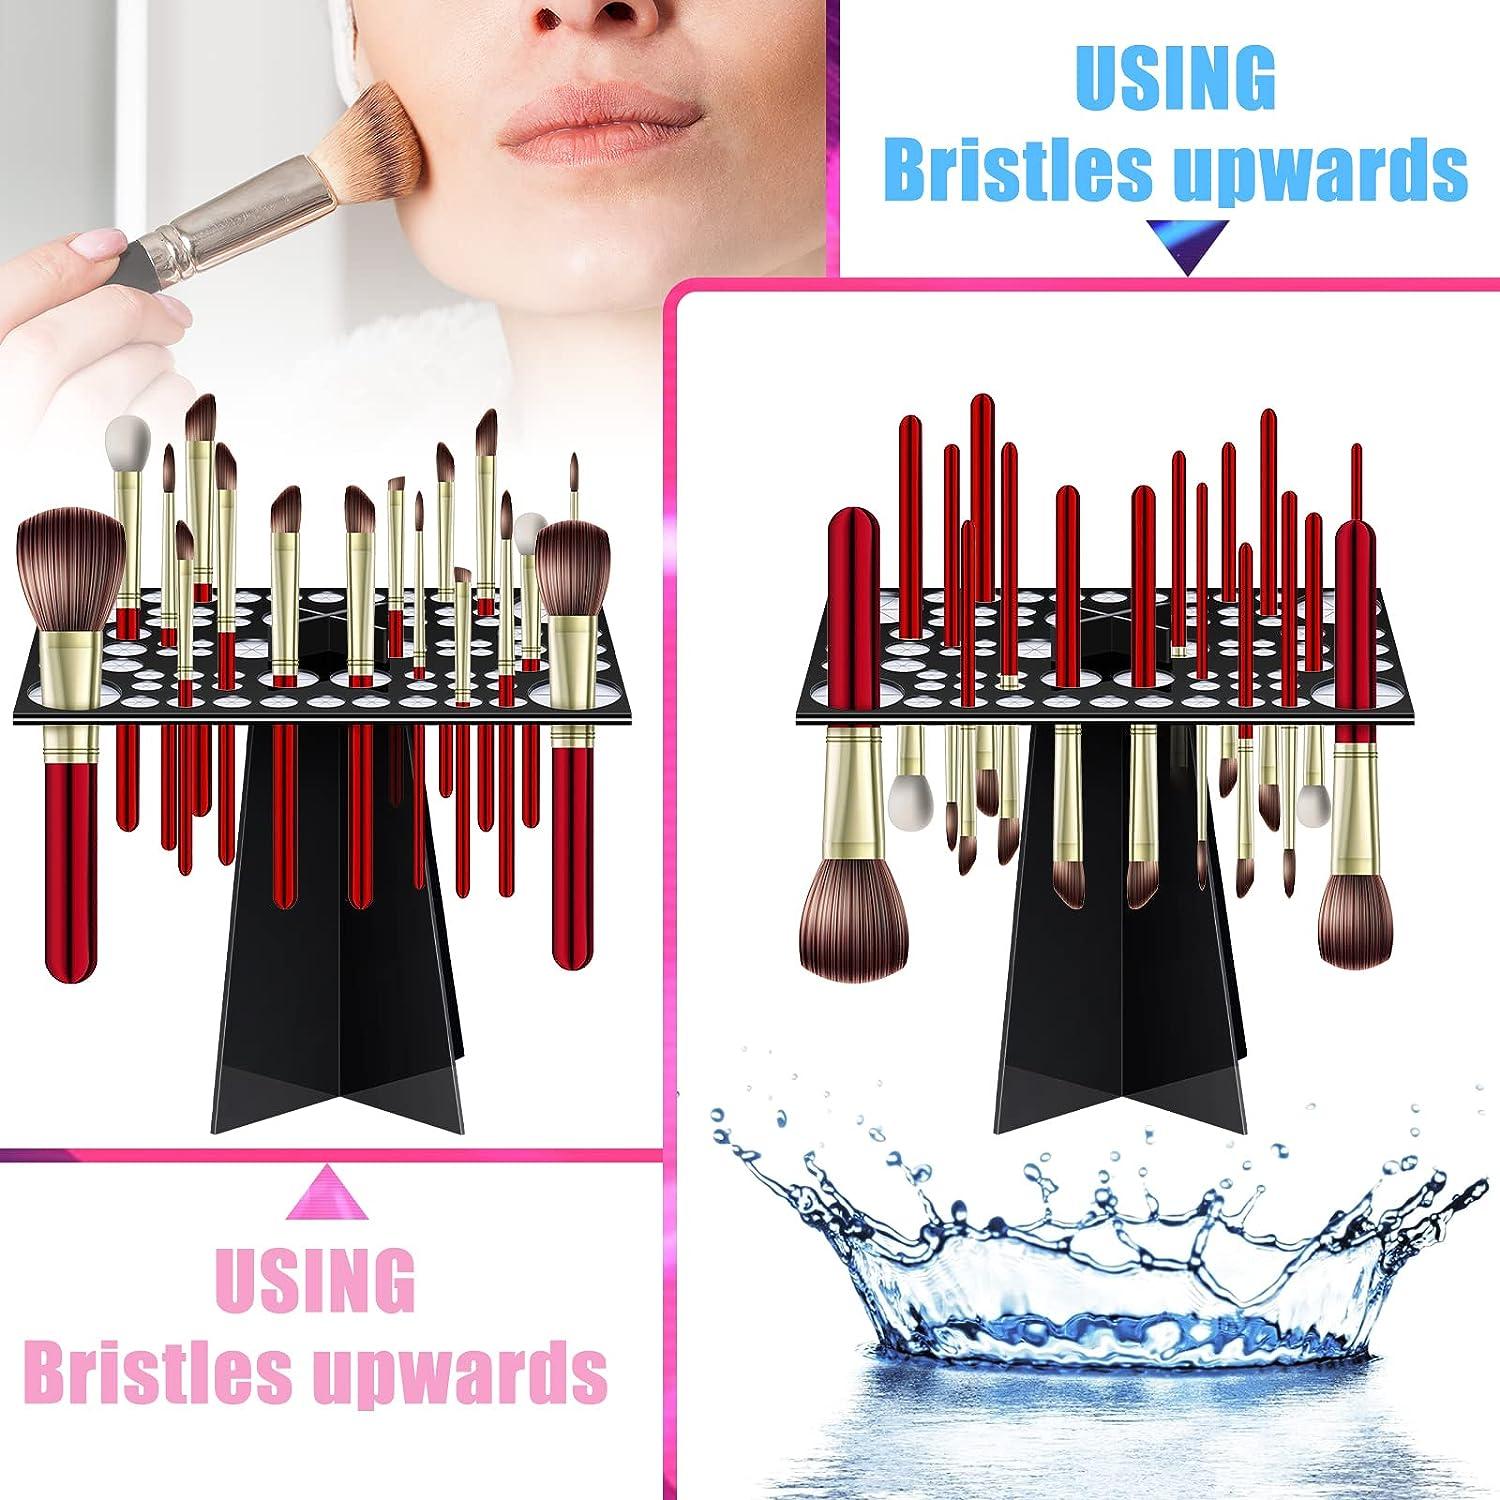 Makeup Brushes Silicone Nail Brush Holder Organizer Stand Shelf Case  Storage Display Drying Rack G1M7Makeup Harr22 From Harrietacy, $12.68